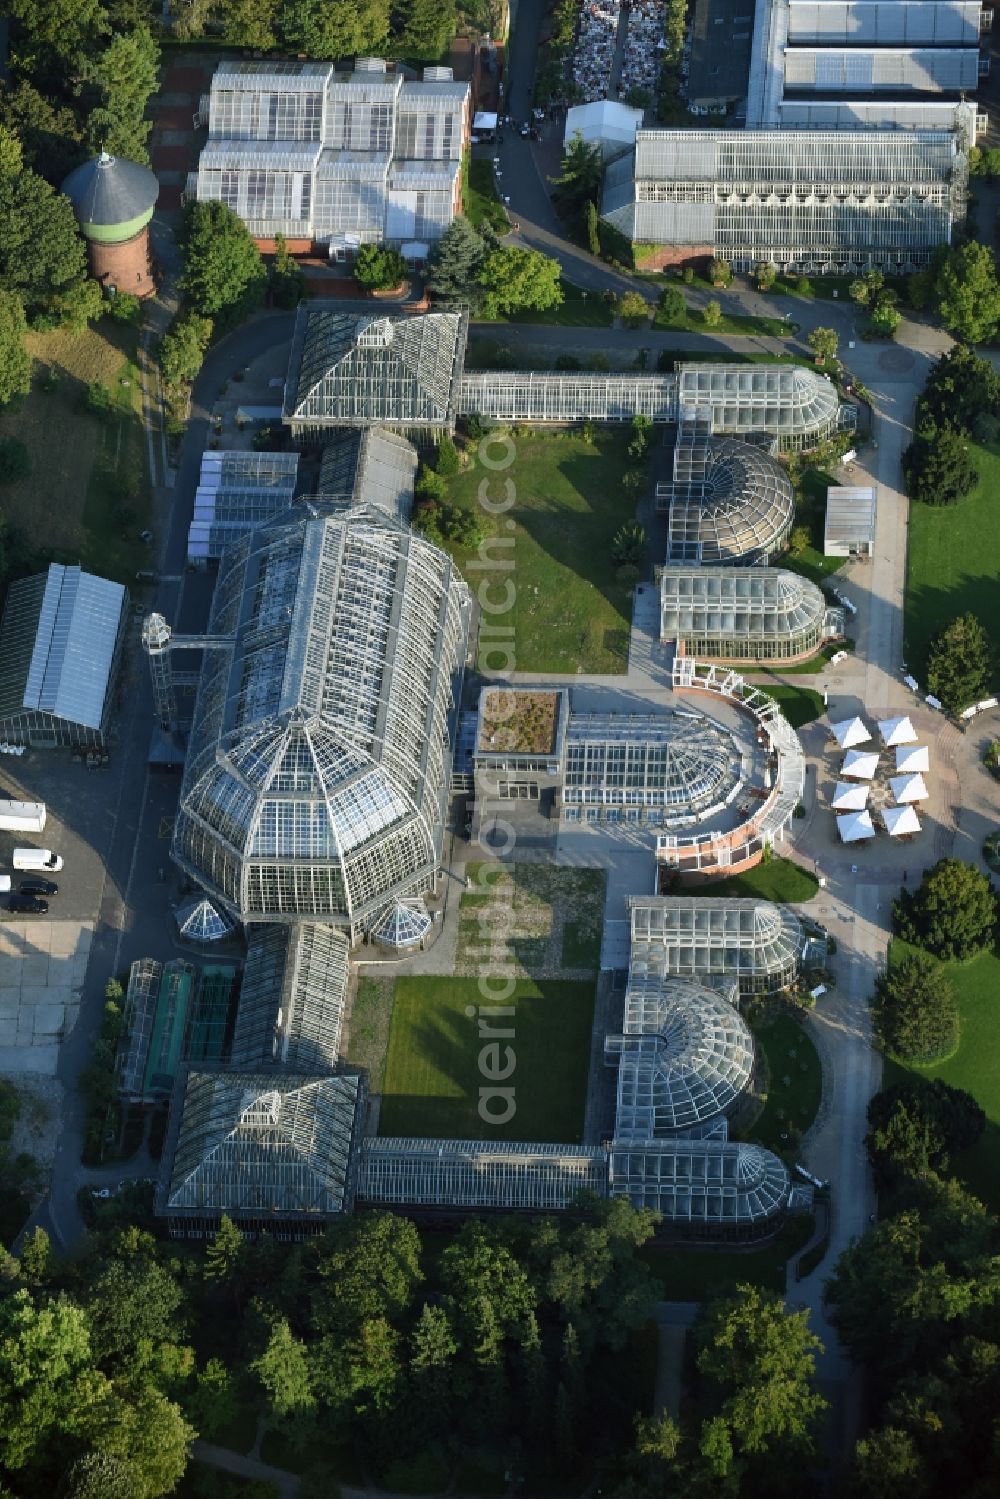 Aerial image Berlin - Main building and greenhouse complex of the Botanical Gardens Berlin-Dahlem in Berlin. The historical glass buildings and greenhouses are dedicated to different areas. The Large Tropical House and the Victoria-House are located in the center